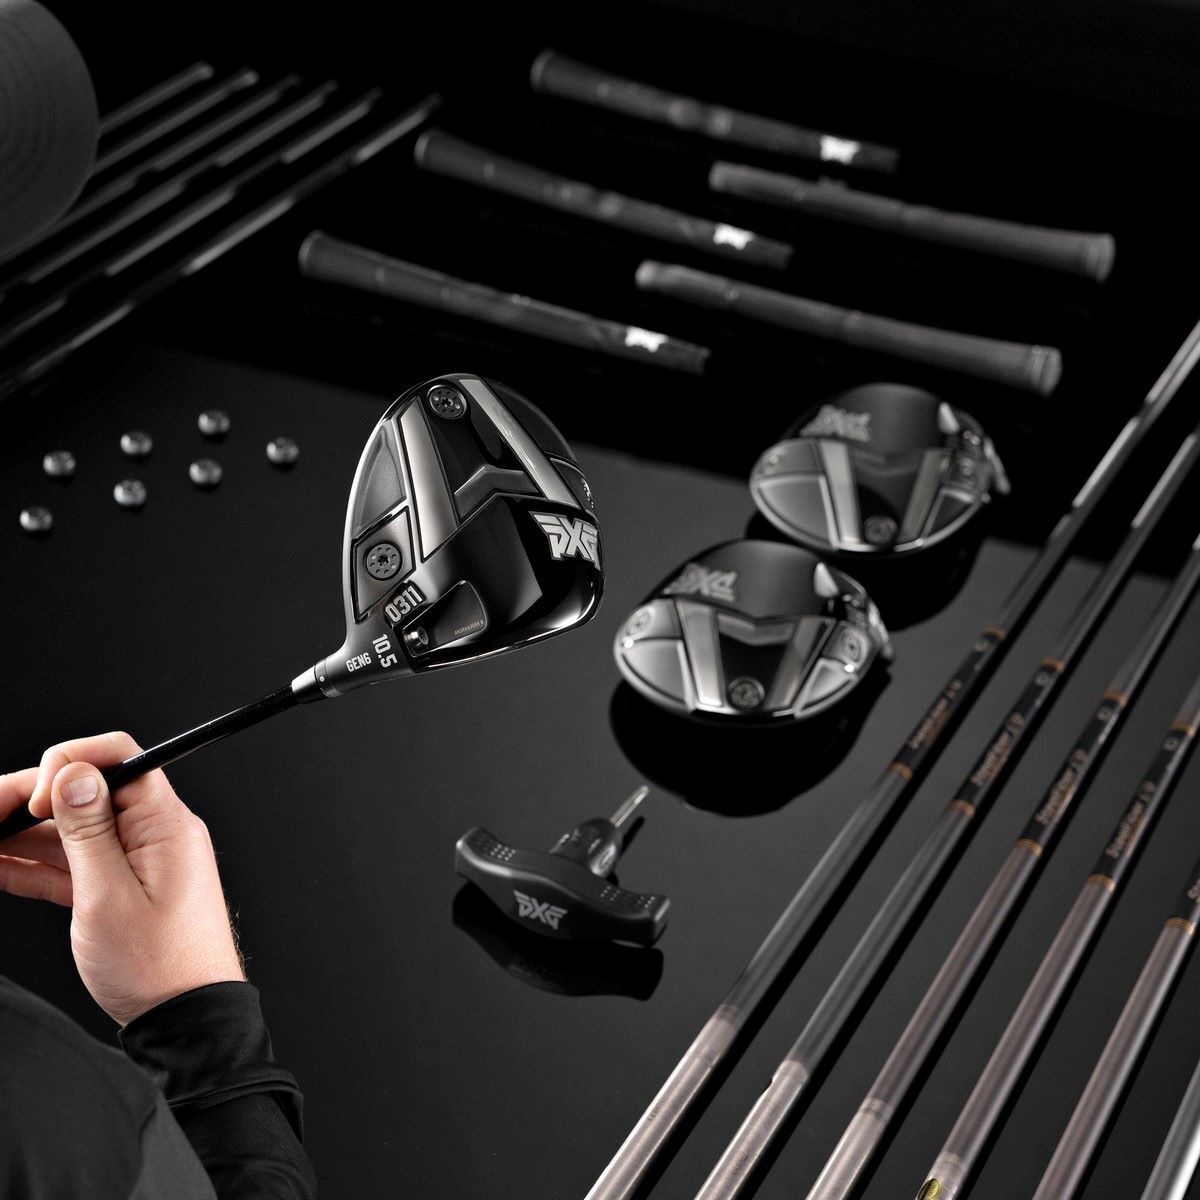 pxg online fitting